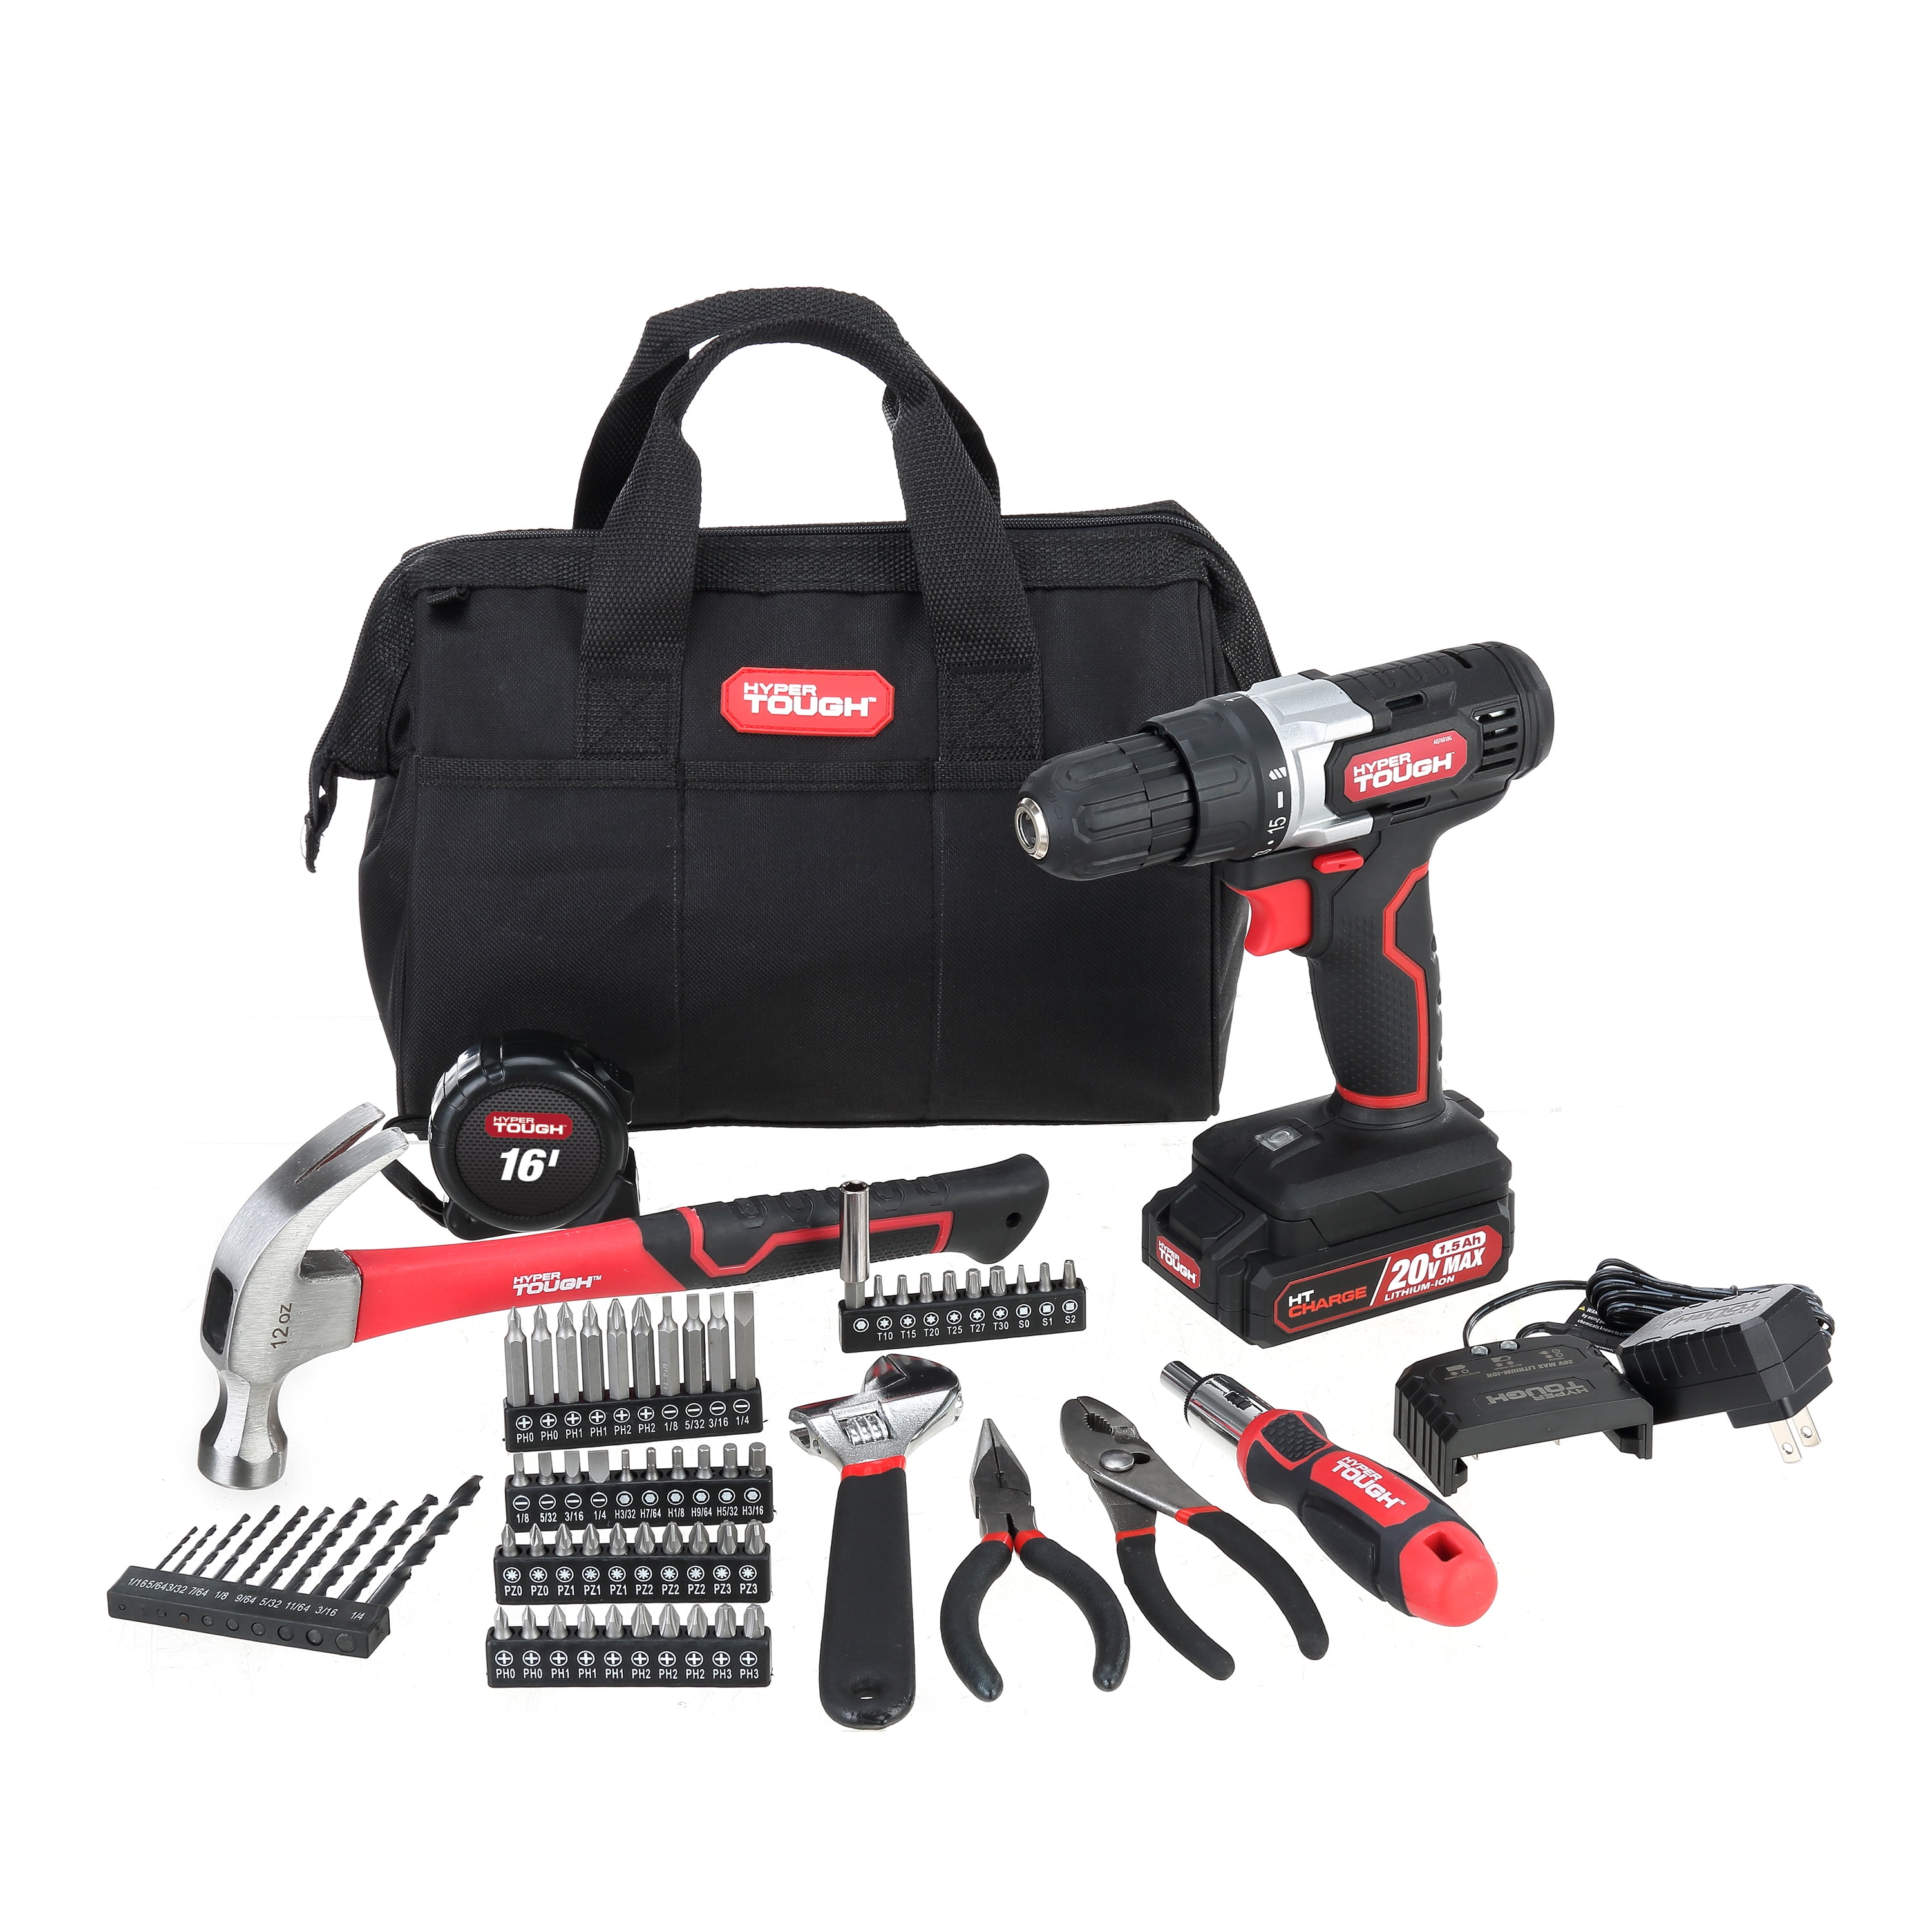 3 20V power drills to finish those home improvements